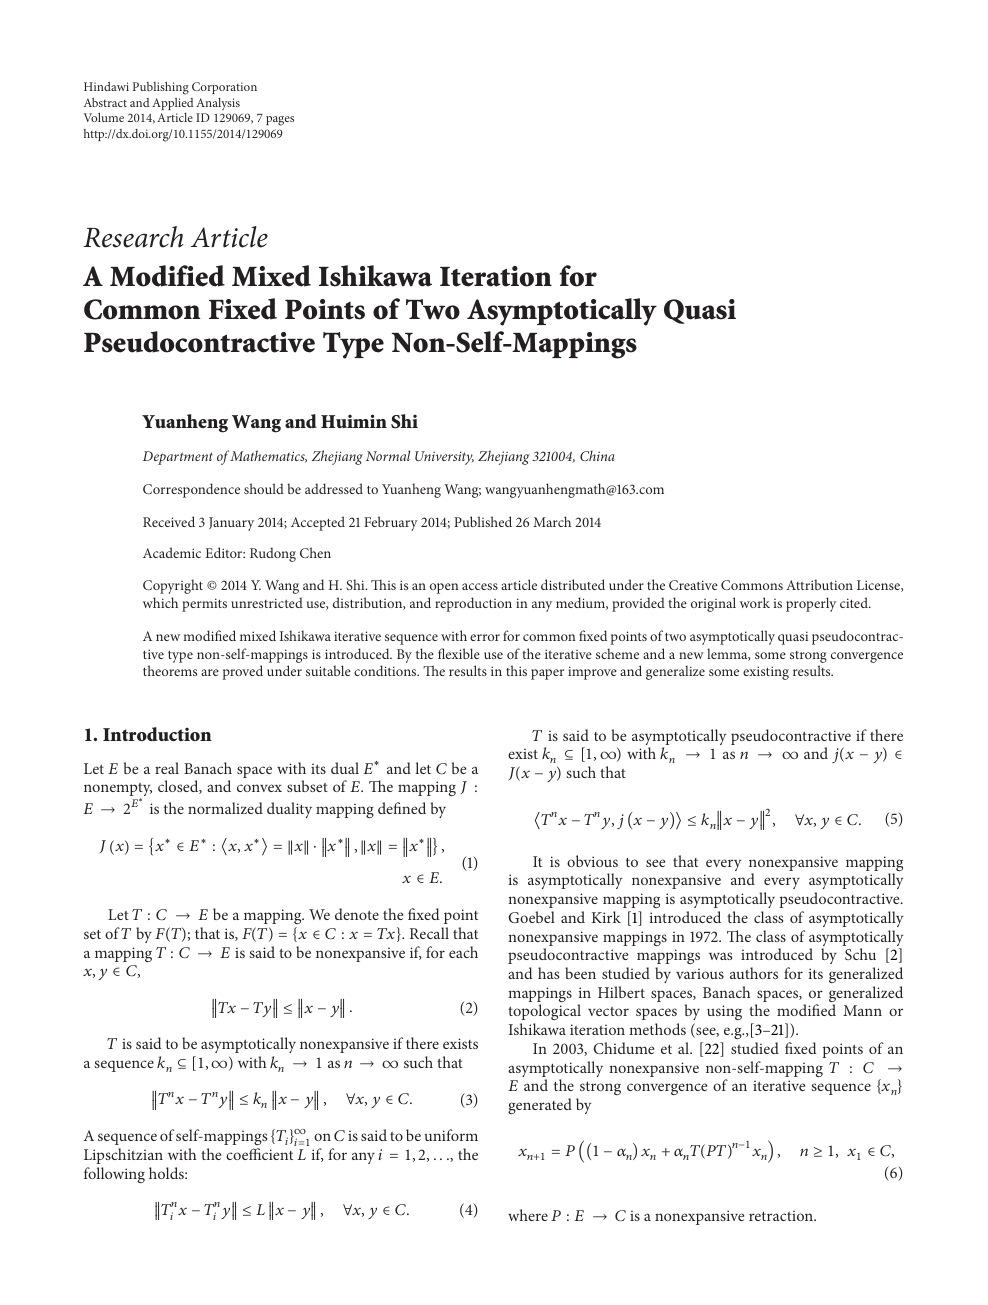 A Modified Mixed Ishikawa Iteration For Common Fixed Points Of Two Asymptotically Quasi Pseudocontractive Type Non Self Mappings Topic Of Research Paper In Mathematics Download Scholarly Article Pdf And Read For Free On